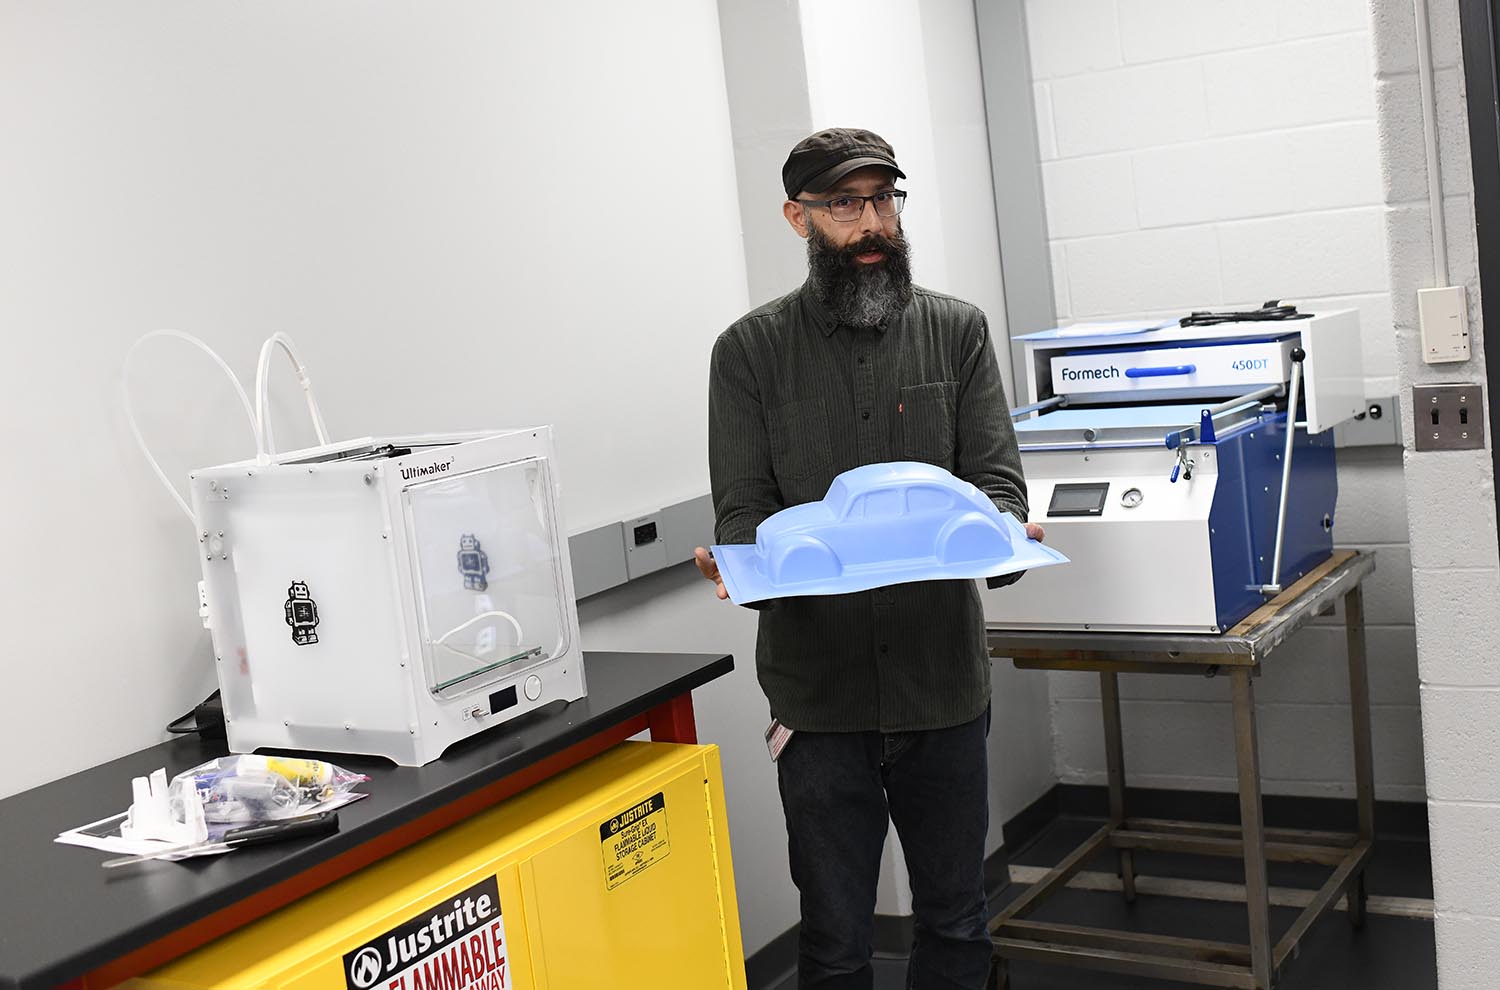 Lopez shows off a vacuum forming tool, which is used to form plastic around a mold and create a permanent object. At left is a 3-D printer.